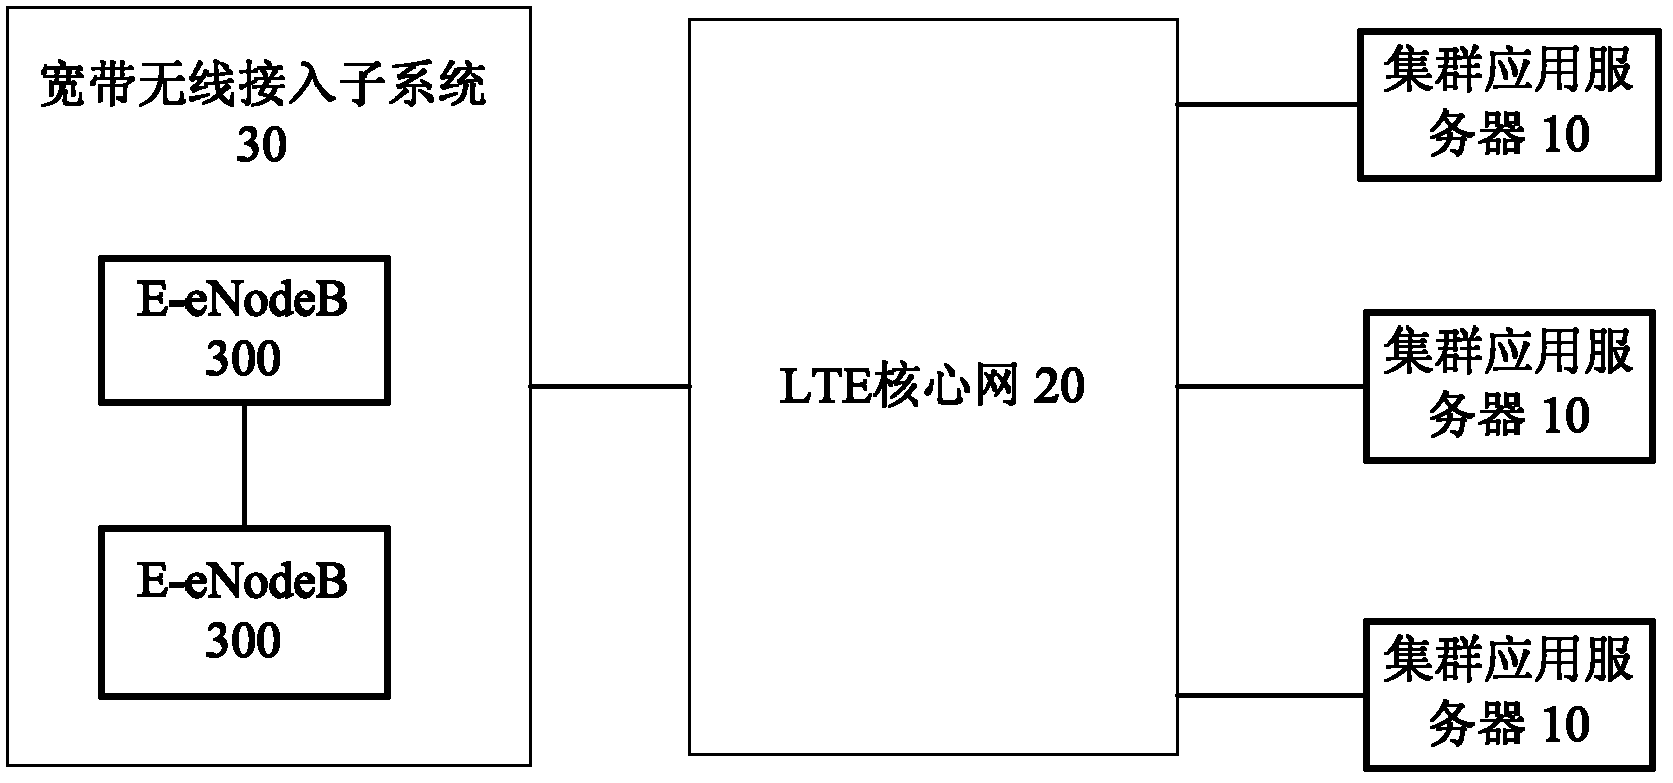 Wideband digital cluster system based on TD-LTE (time division-long term evolution) and data transmission method thereof